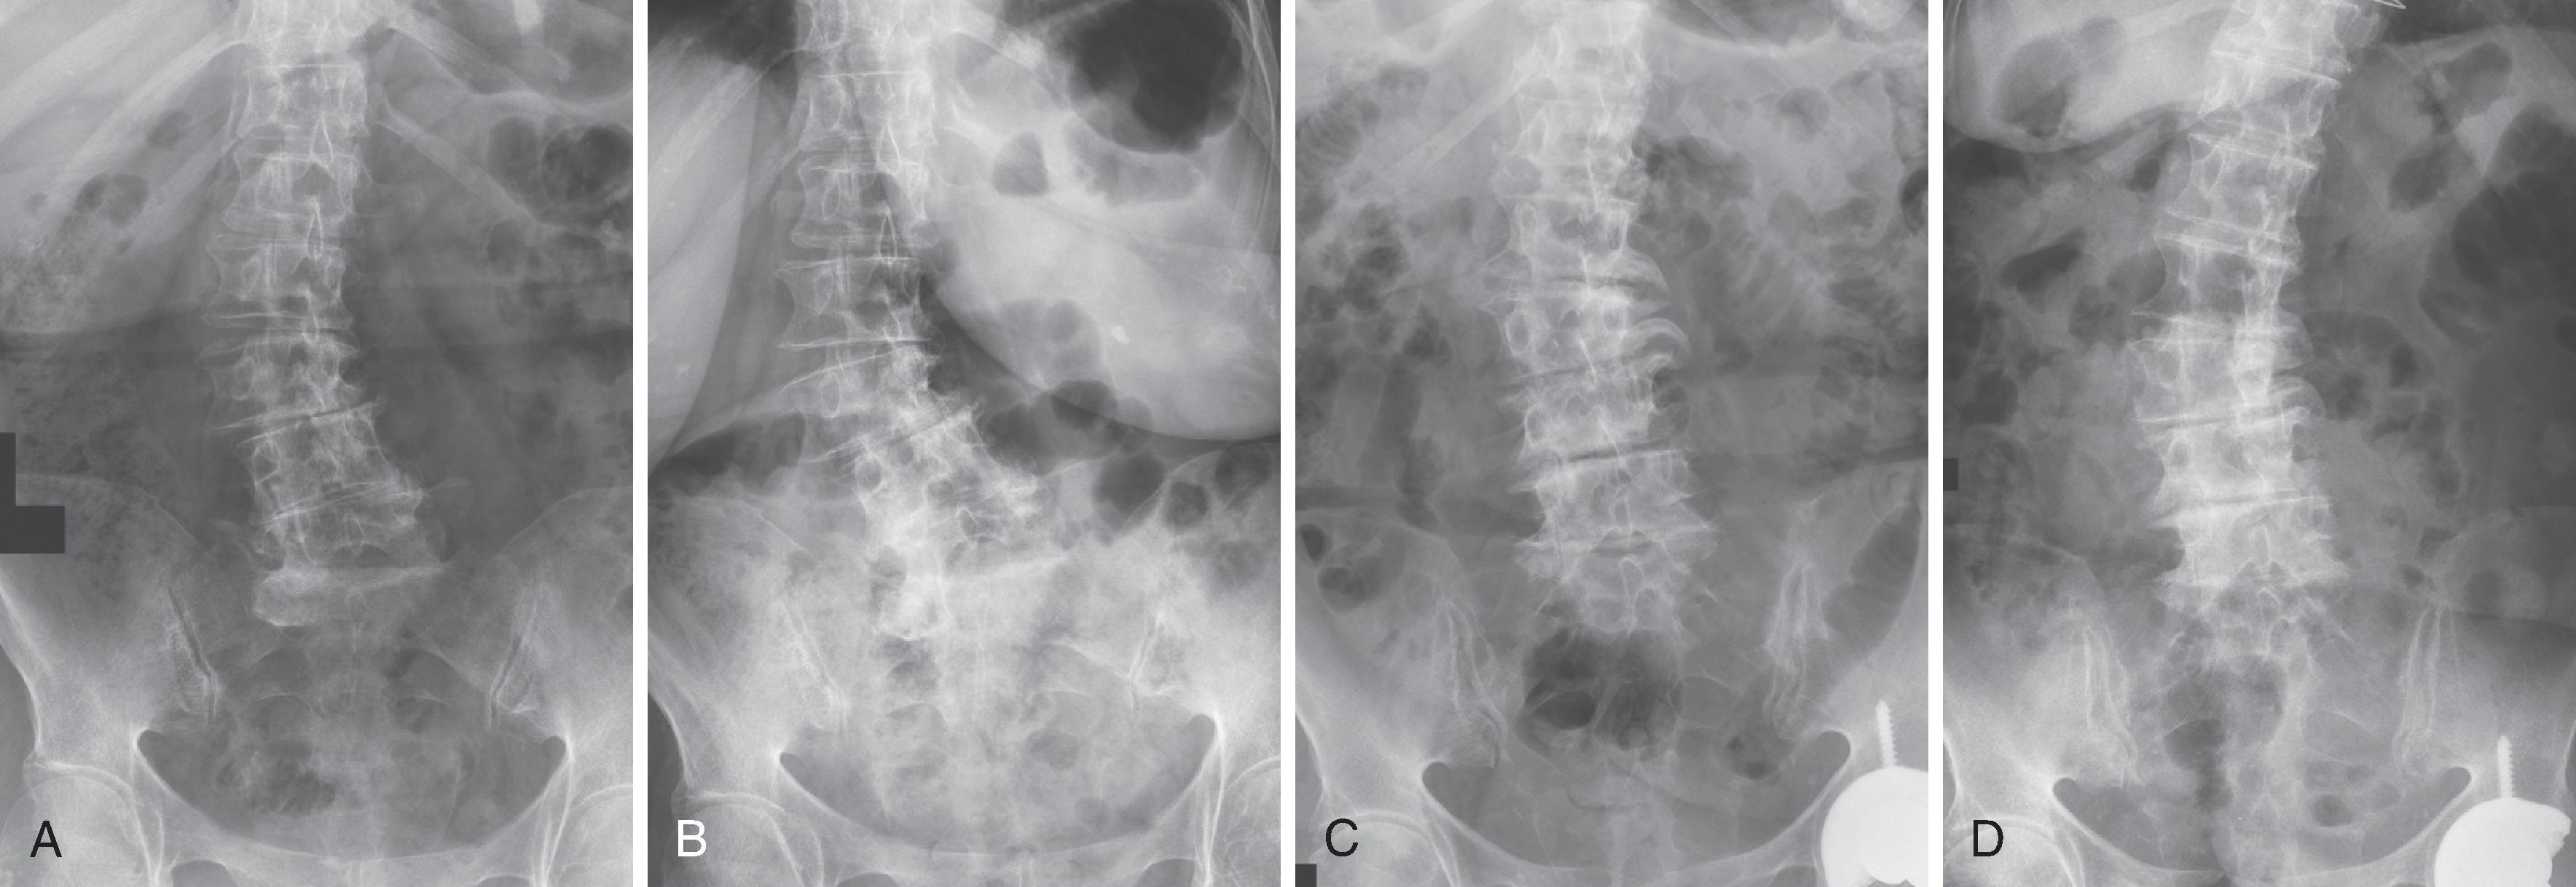 Figure 20.5, The effect of upright weight bearing radiographs on balance and deformity. Recumbent radiograph (A) shows lumbar scoliosis with a rotatory component, which is significantly exacerbated in a subsequent upright radiograph (B) . In another patient, the recumbent radiograph (C) underestimates the true scoliotic curve seen on an upright radiograph (D). Sagittal and coronal balance can only be assessed on upright, weight bearing imaging.